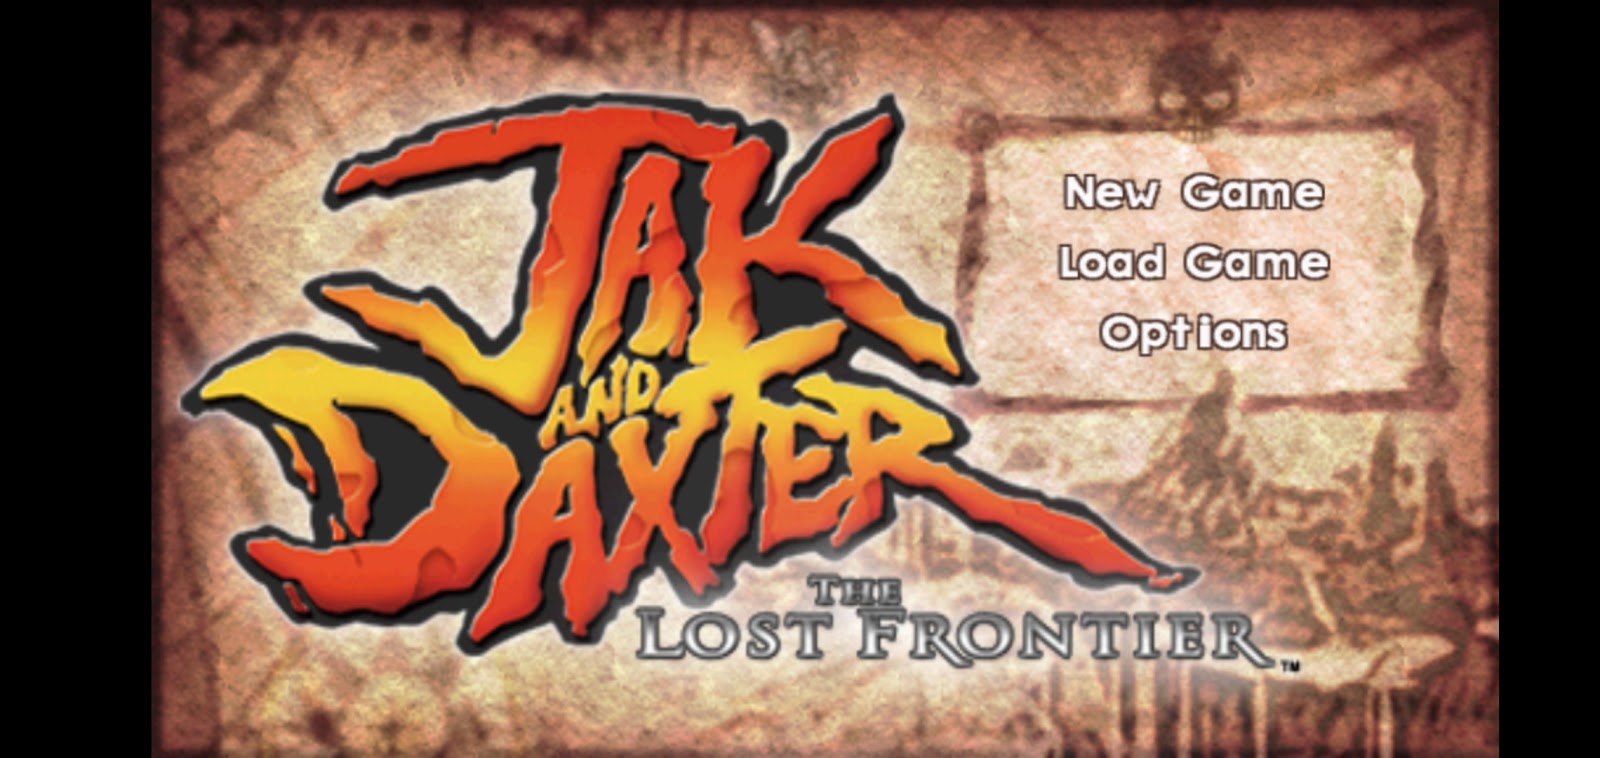 Jak And Daxter - The Lost Frontier ROM - PSP Download - Emulator Games